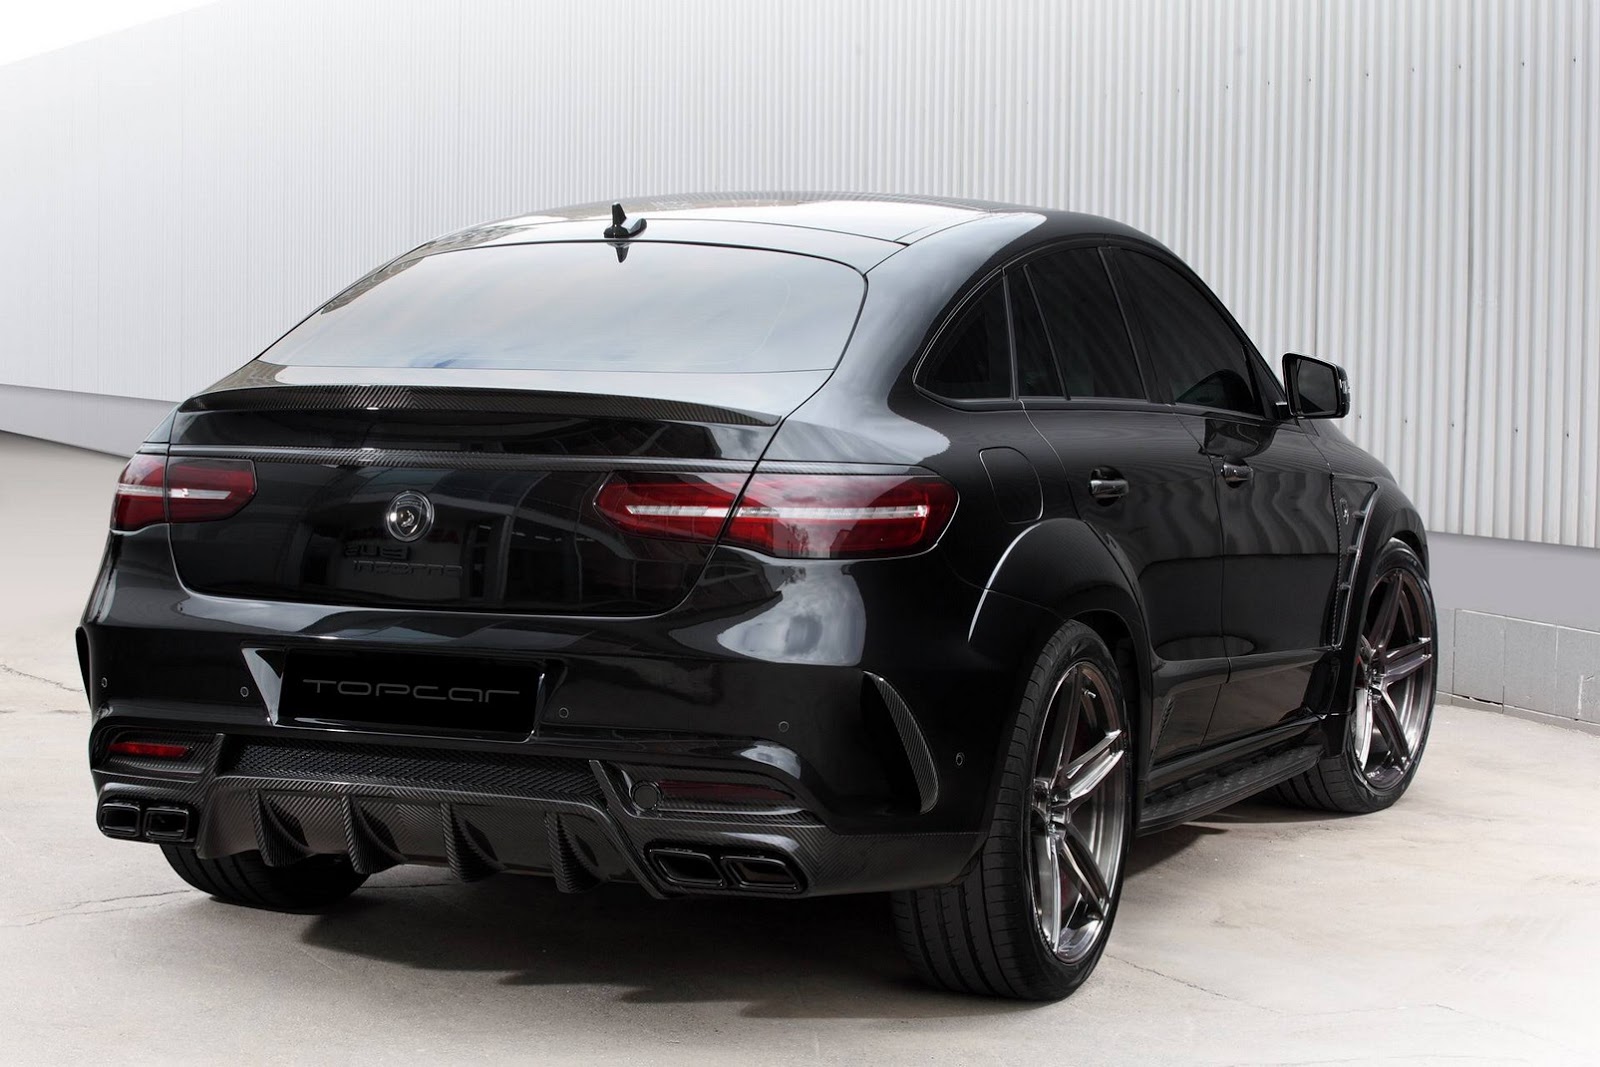 topcar-gle-coupe-inferno-carbon-10